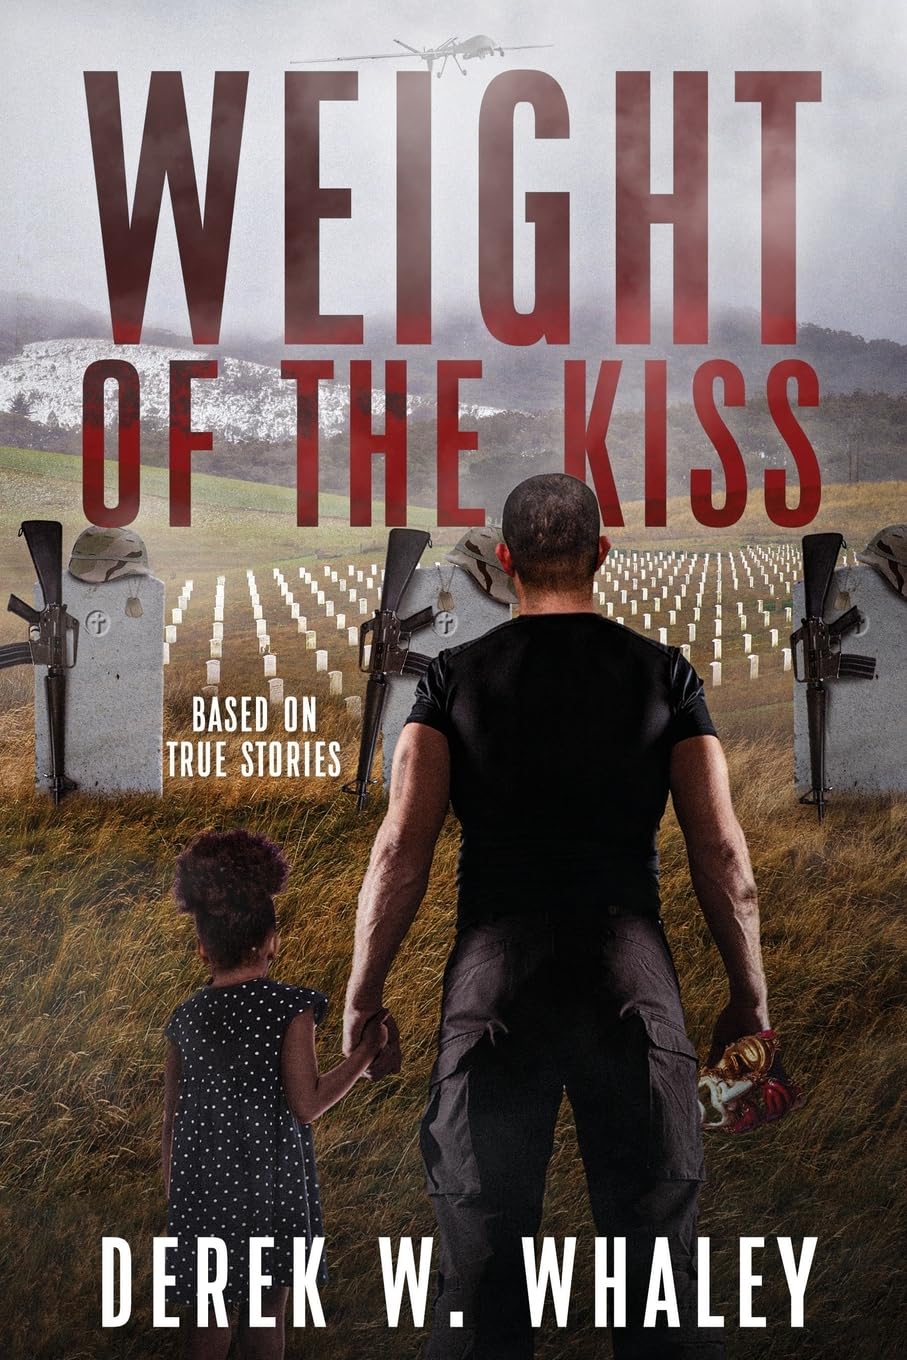 New book "Weight of the Kiss" by Derek W. Whaley is released, a collection of true stories about military life in Afghanistan that examines duty, honor, friendship, and the lifelong toll of war